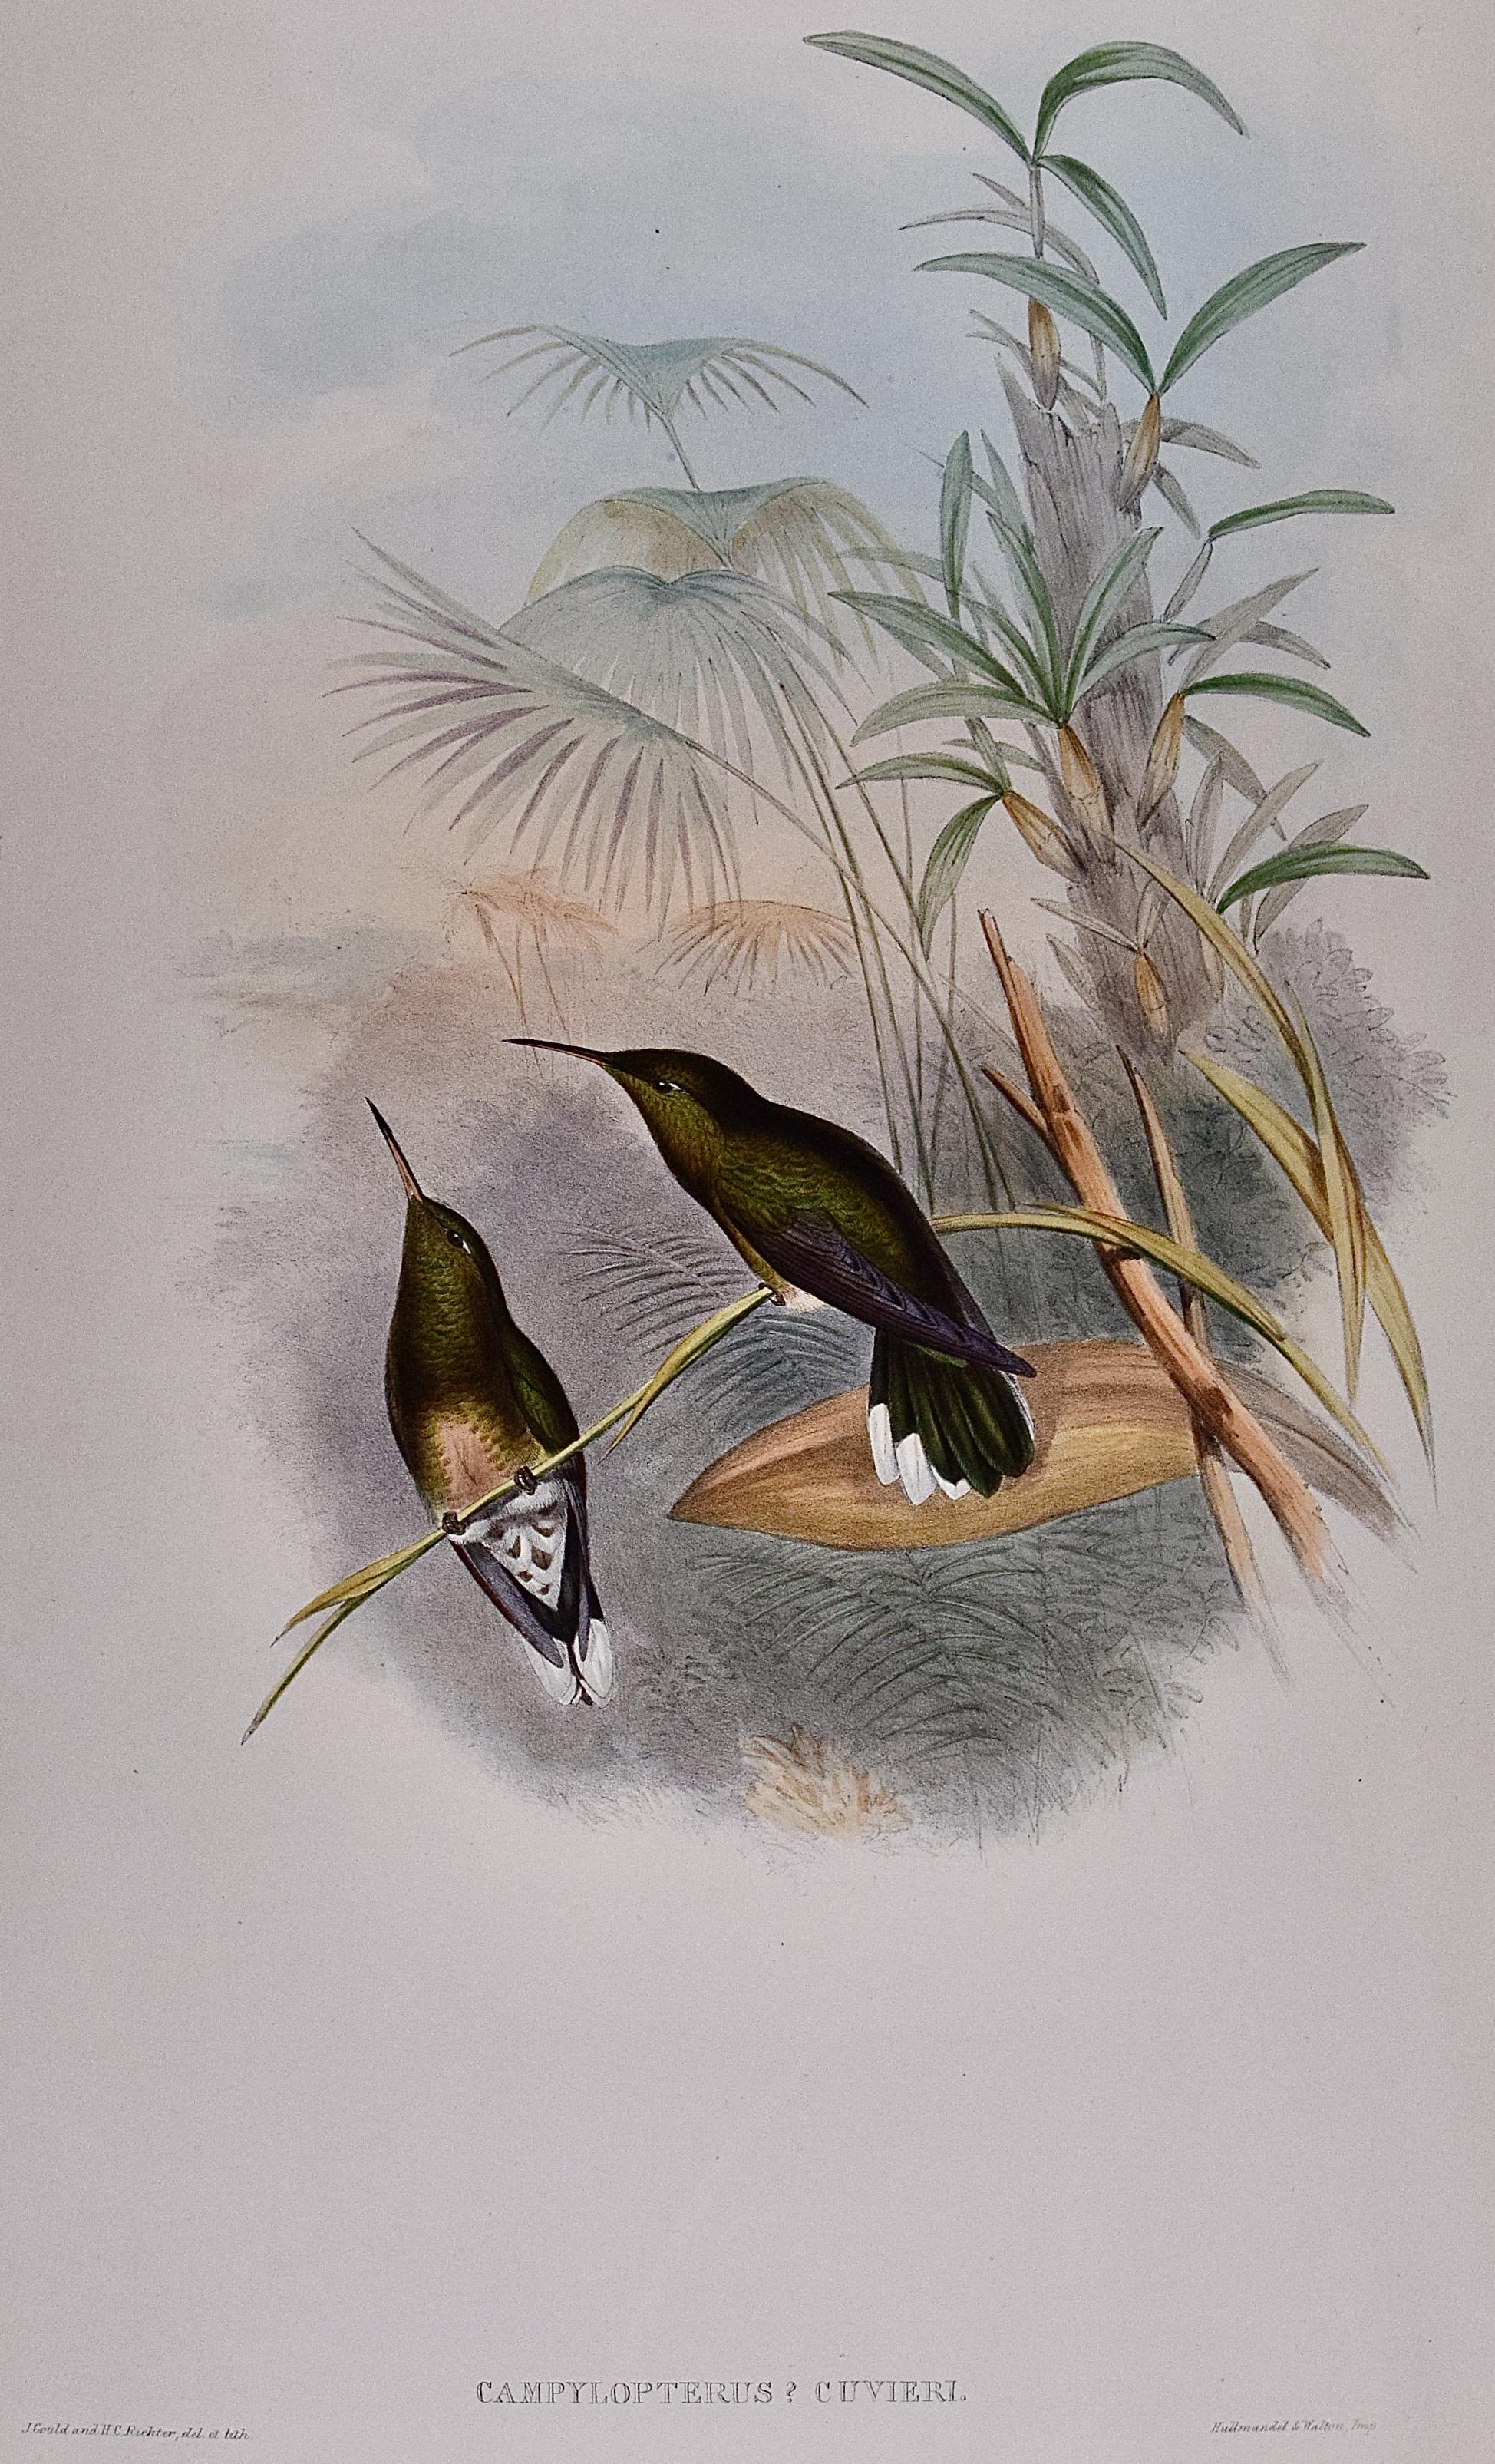 Cuvier's Sabre-wing Hummingbirds: A 19th C. Hand-colored lithograph by Gould